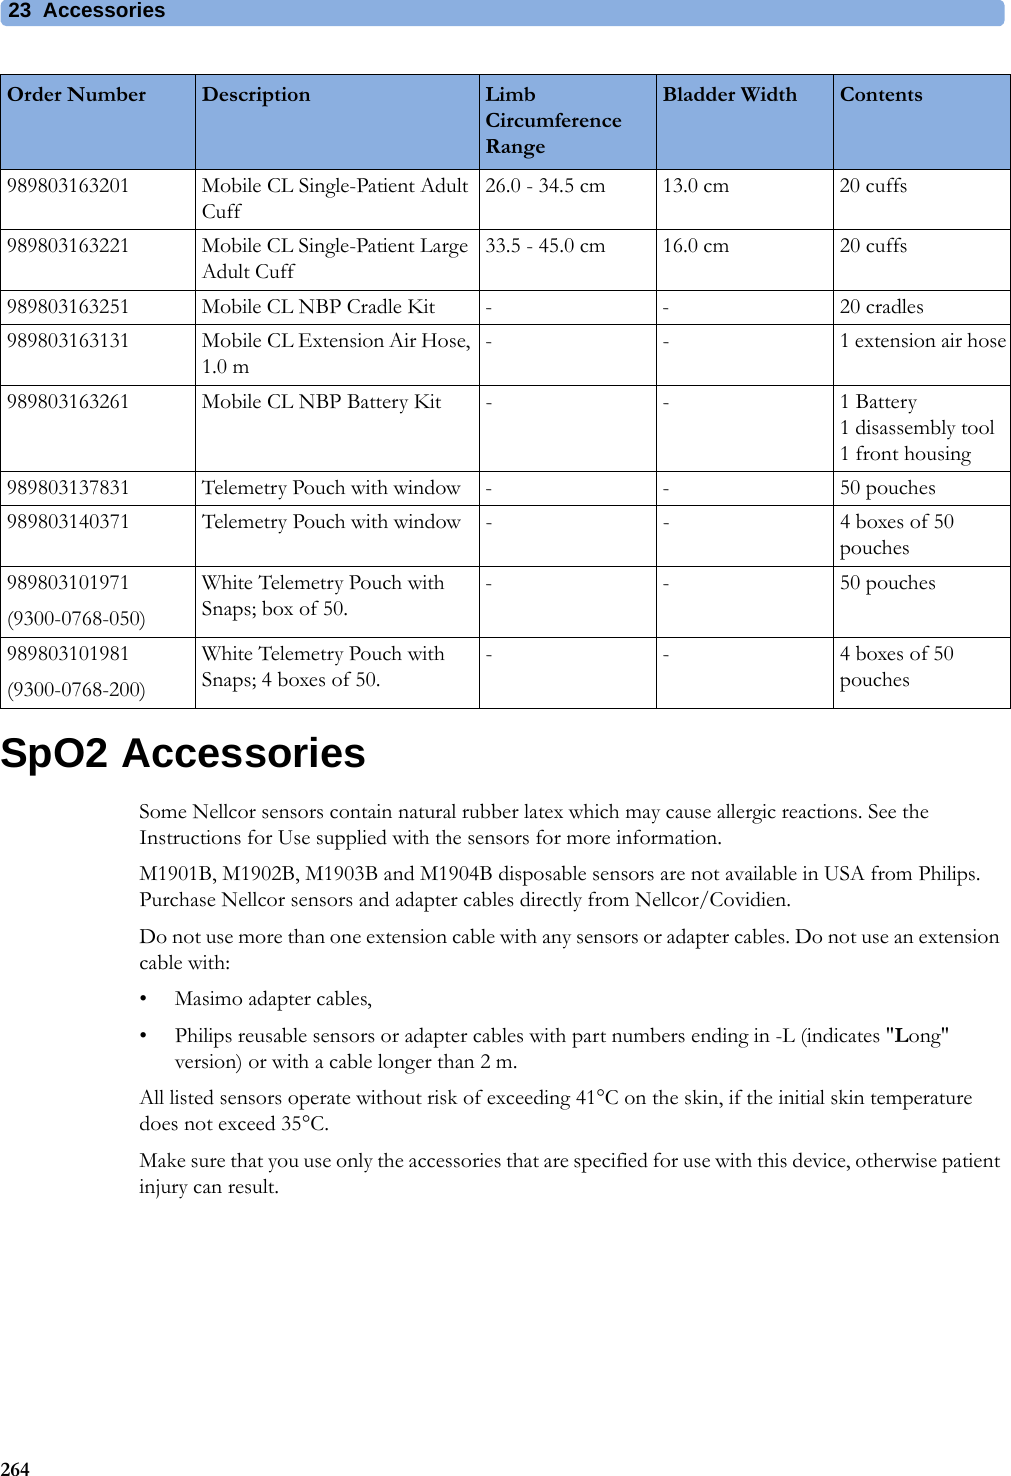 23 Accessories264SpO2 AccessoriesSome Nellcor sensors contain natural rubber latex which may cause allergic reactions. See the Instructions for Use supplied with the sensors for more information.M1901B, M1902B, M1903B and M1904B disposable sensors are not available in USA from Philips. Purchase Nellcor sensors and adapter cables directly from Nellcor/Covidien.Do not use more than one extension cable with any sensors or adapter cables. Do not use an extension cable with:• Masimo adapter cables,• Philips reusable sensors or adapter cables with part numbers ending in -L (indicates &quot;Long&quot; version) or with a cable longer than 2 m.All listed sensors operate without risk of exceeding 41°C on the skin, if the initial skin temperature does not exceed 35°C.Make sure that you use only the accessories that are specified for use with this device, otherwise patient injury can result.989803163201 Mobile CL Single-Patient Adult Cuff26.0 - 34.5 cm 13.0 cm 20 cuffs989803163221 Mobile CL Single-Patient Large Adult Cuff33.5 - 45.0 cm 16.0 cm 20 cuffs989803163251 Mobile CL NBP Cradle Kit - - 20 cradles989803163131 Mobile CL Extension Air Hose, 1.0 m- - 1 extension air hose989803163261 Mobile CL NBP Battery Kit - -  1 Battery1 disassembly tool1 front housing989803137831 Telemetry Pouch with window - - 50 pouches989803140371 Telemetry Pouch with window - - 4 boxes of 50 pouches989803101971(9300-0768-050)White Telemetry Pouch with Snaps; box of 50.- - 50 pouches989803101981(9300-0768-200)White Telemetry Pouch with Snaps; 4 boxes of 50.- - 4 boxes of 50 pouchesOrder Number Description Limb Circumference RangeBladder Width Contents